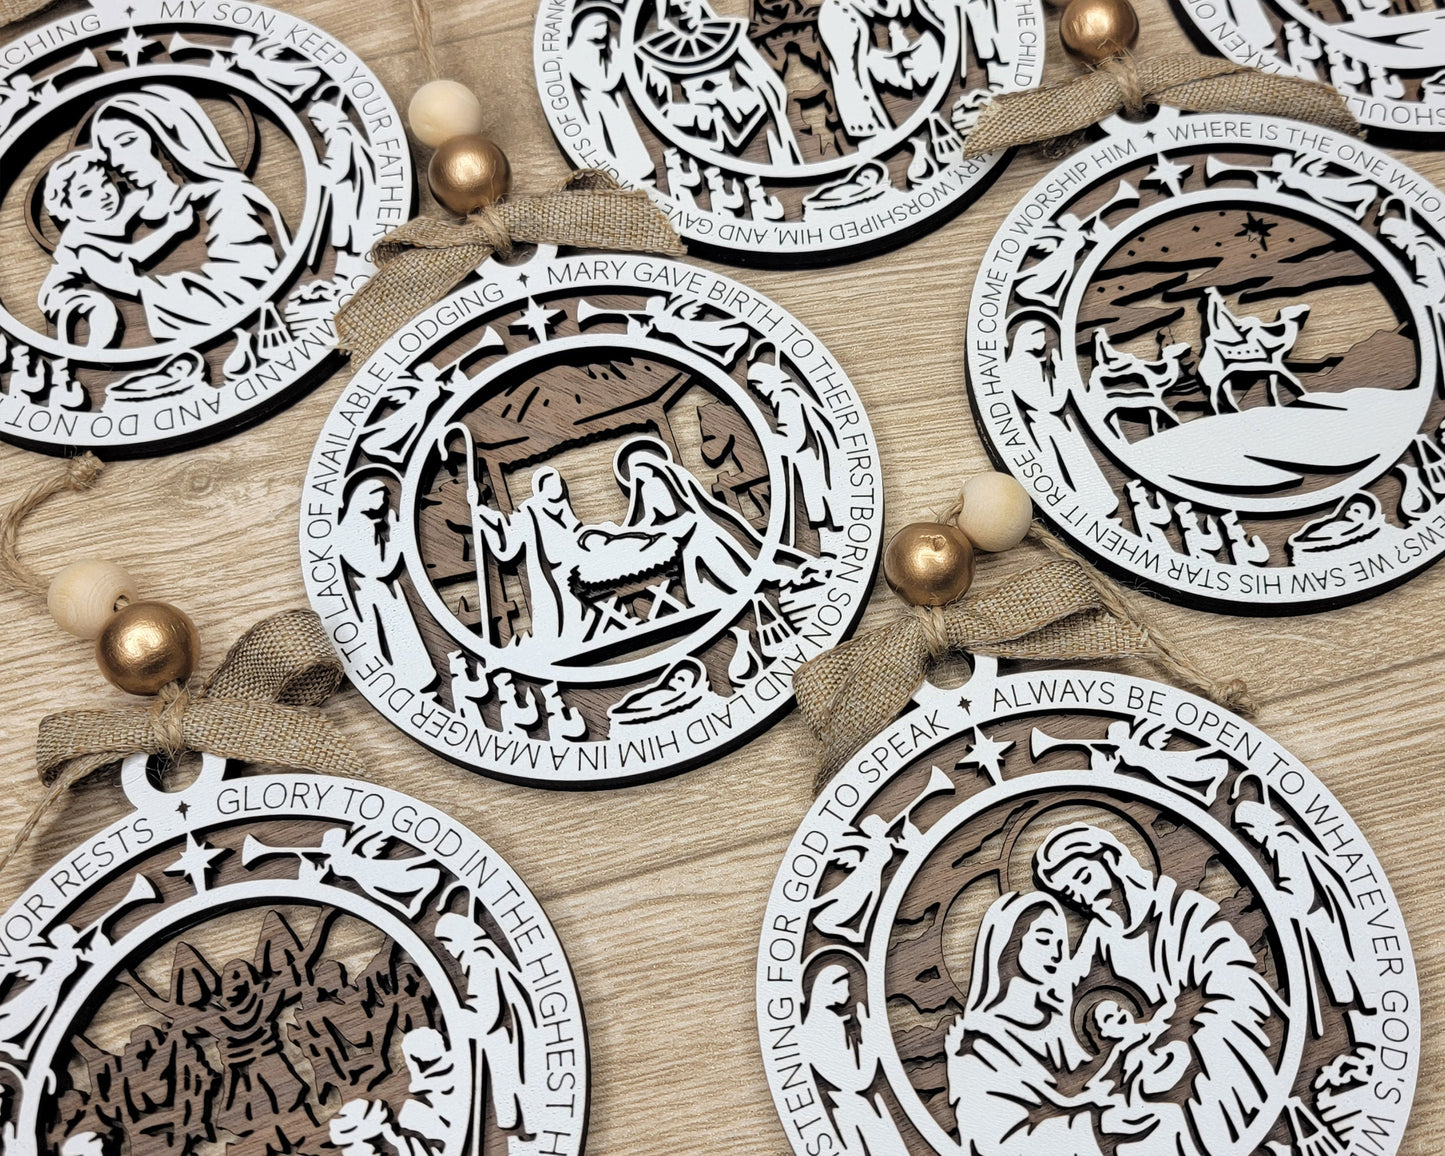 The Christmas Story Ornaments - 8 Unique Designs in 4 Styles - Tested on Glowforge & Lightburn